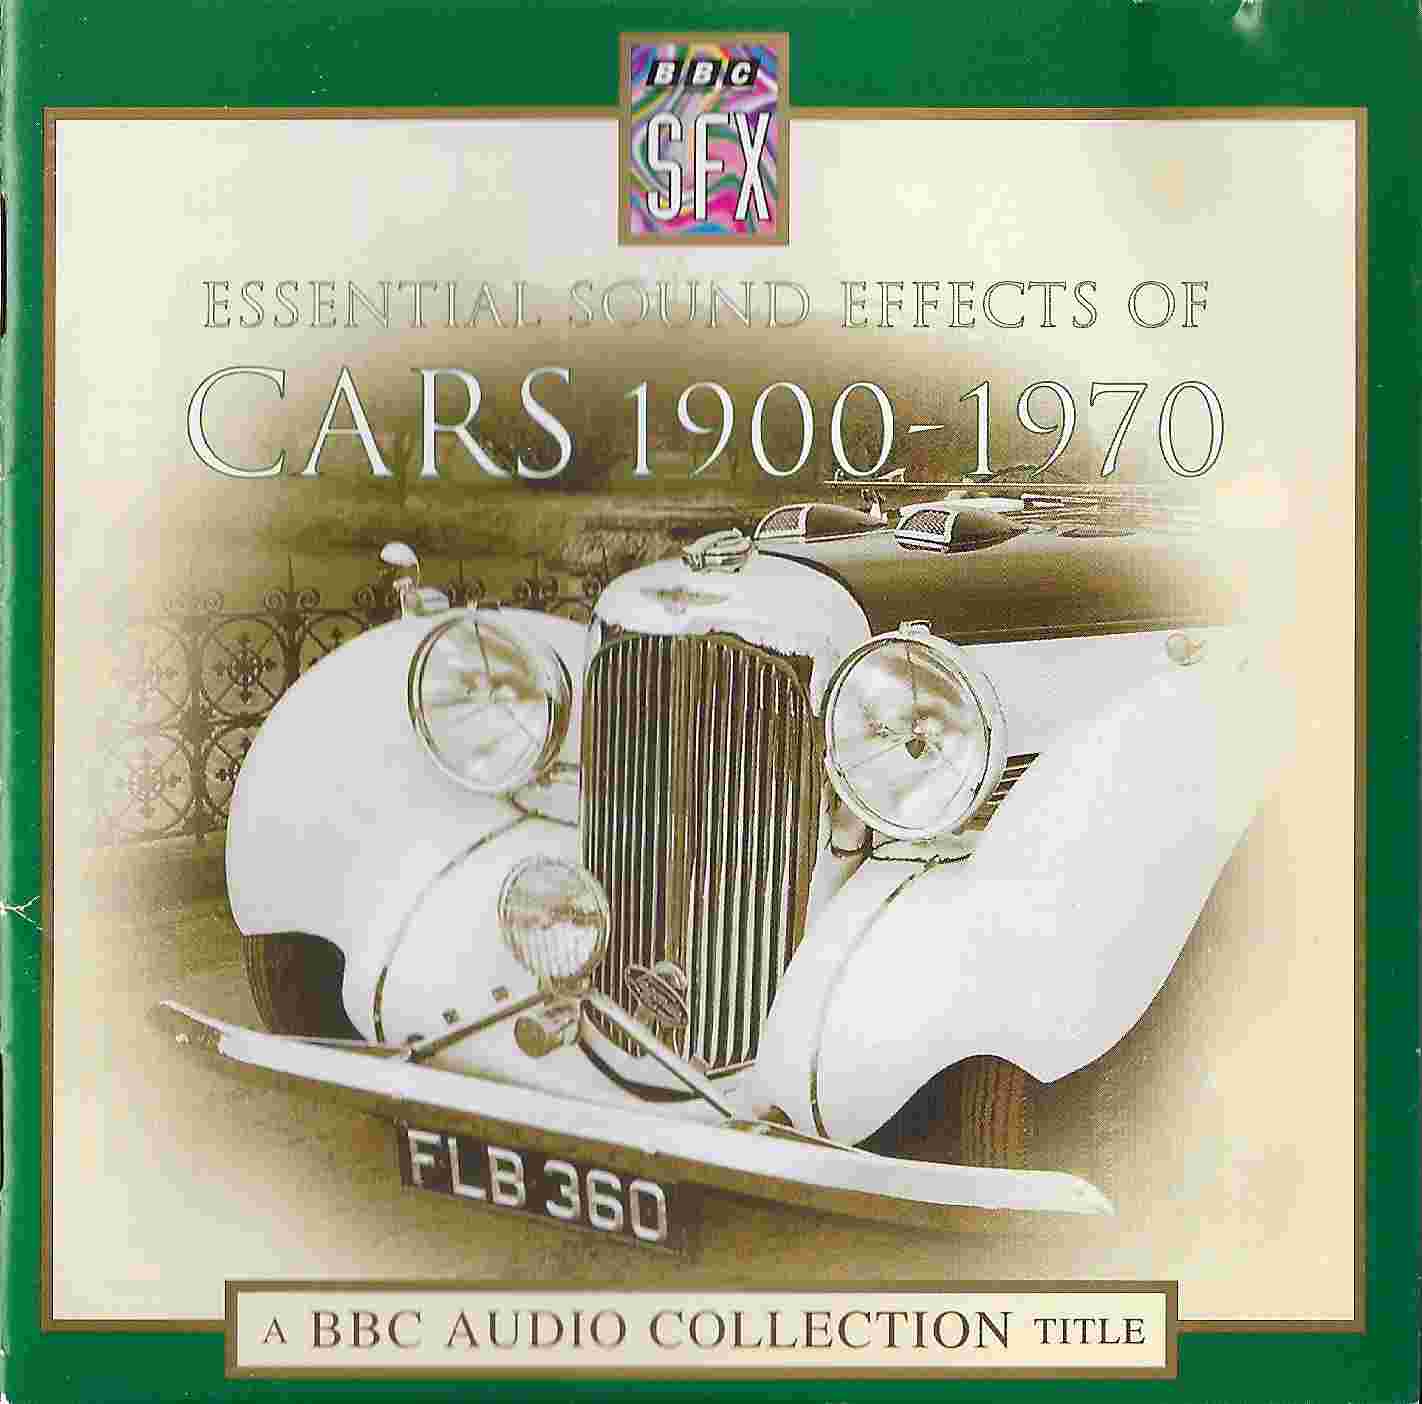 Picture of BBCCD874 Essential sound effects of cars 1900 - 1970 by artist Various from the BBC cds - Records and Tapes library